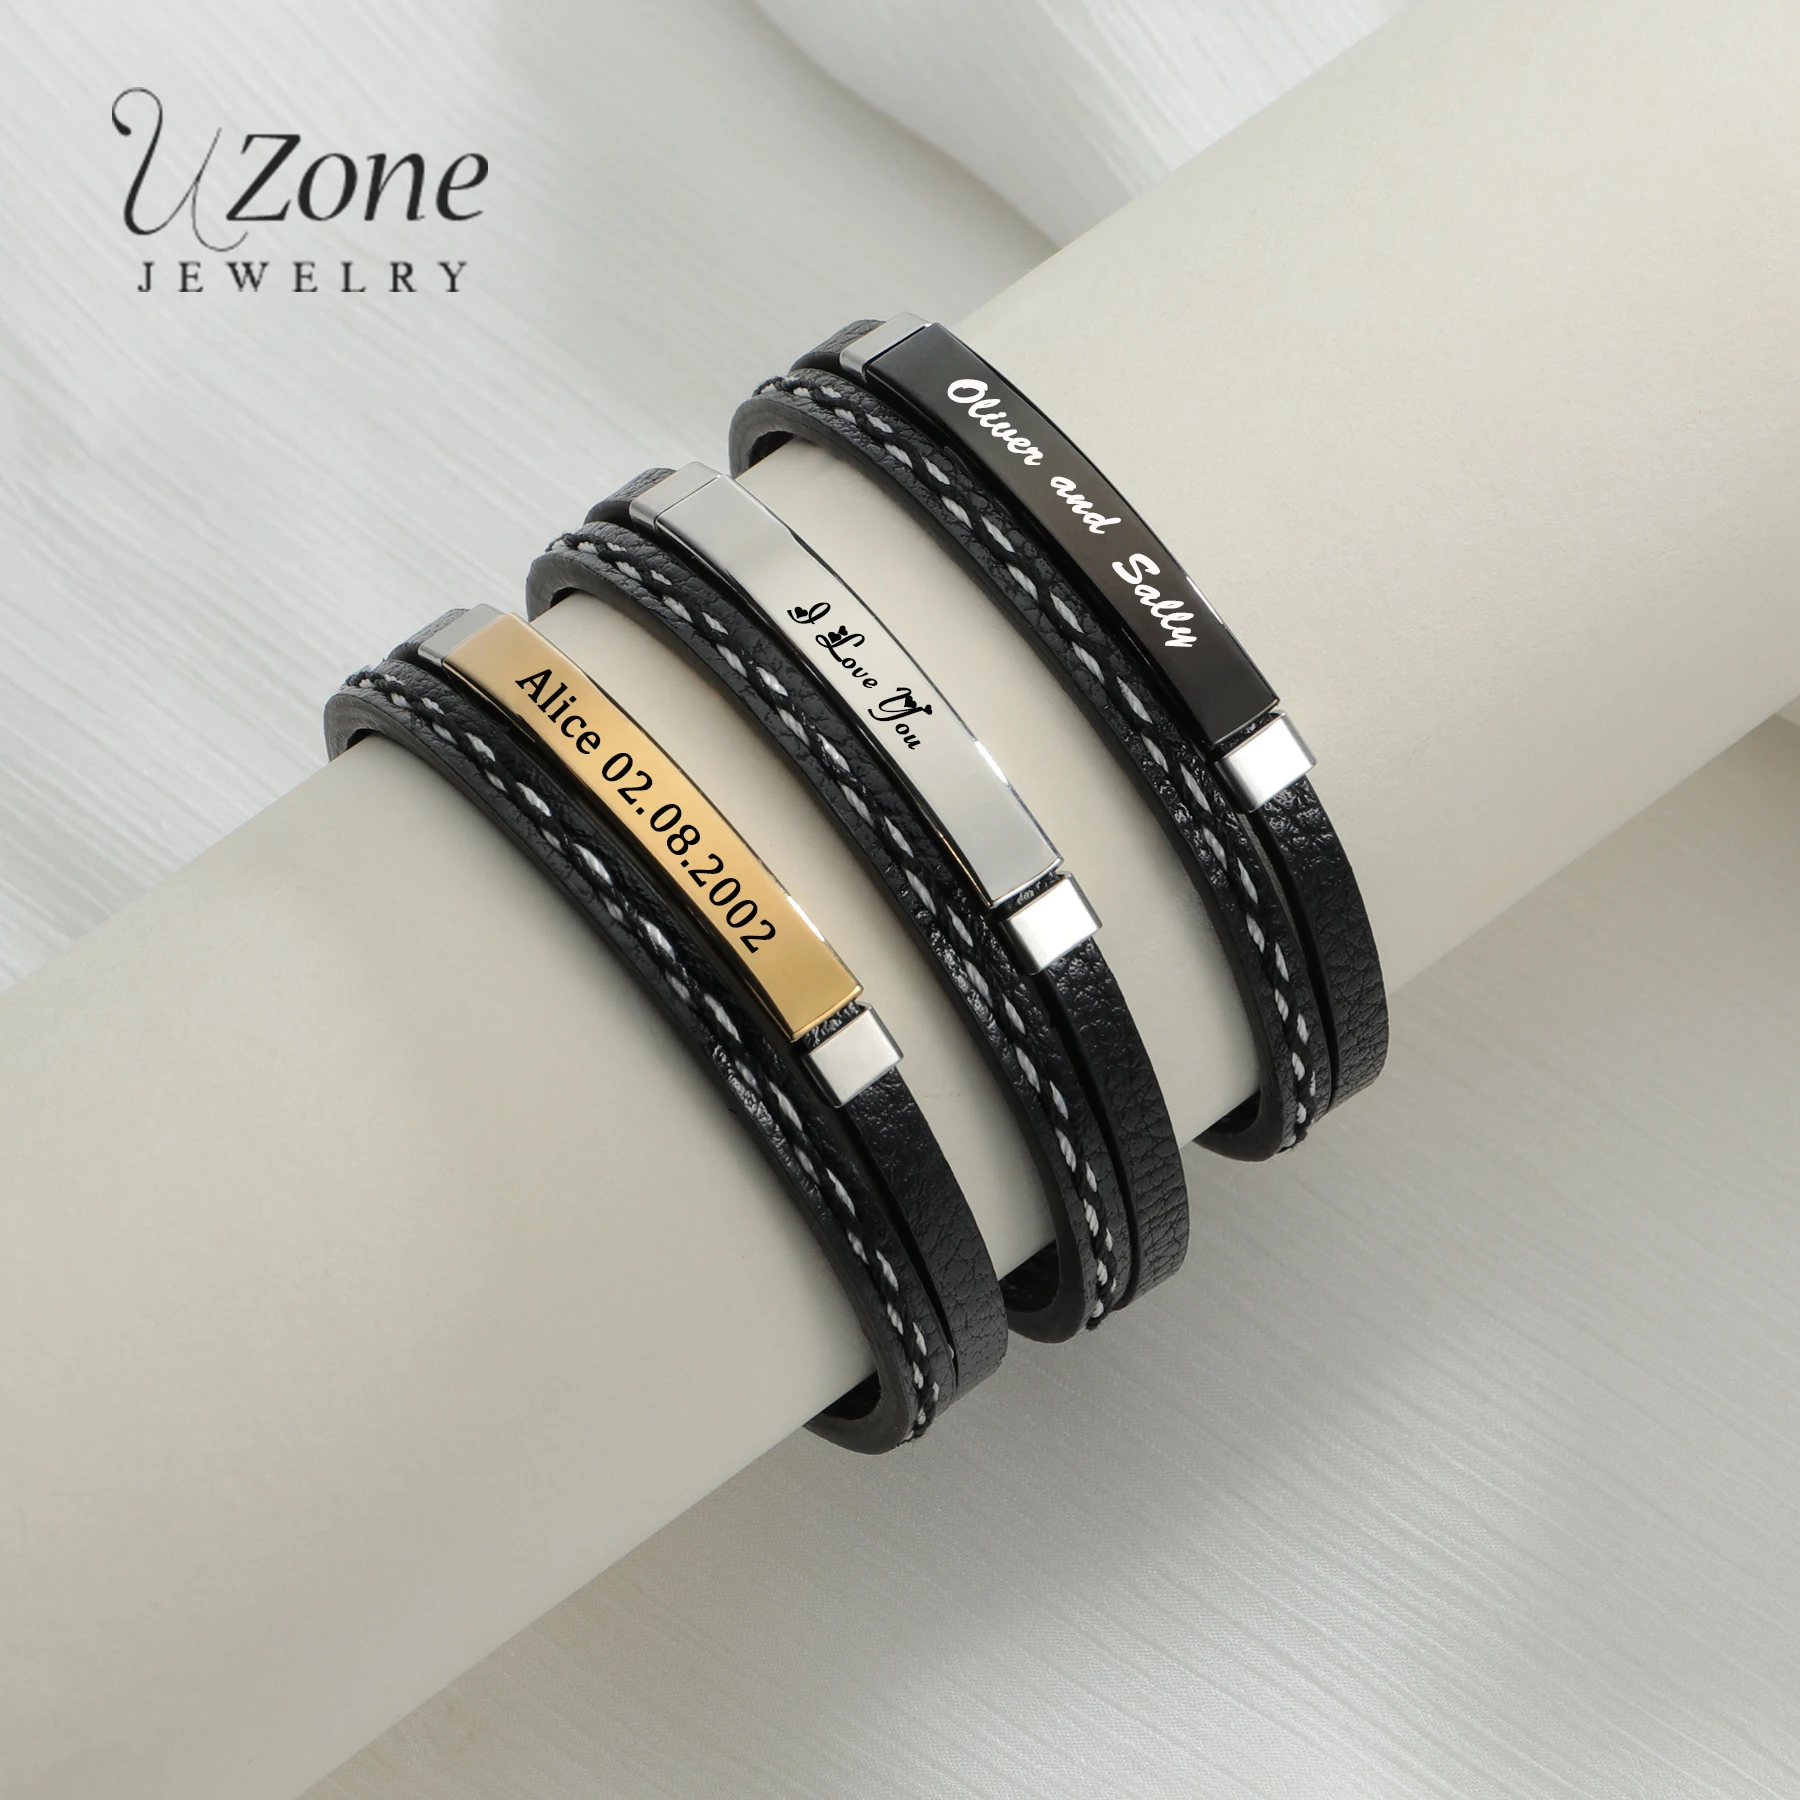 

Uzone Customize Bracelet Engrave Name Date Text New Stainless Steel Leather Chain Bangle for Men Women Personalized Gift Jewelry